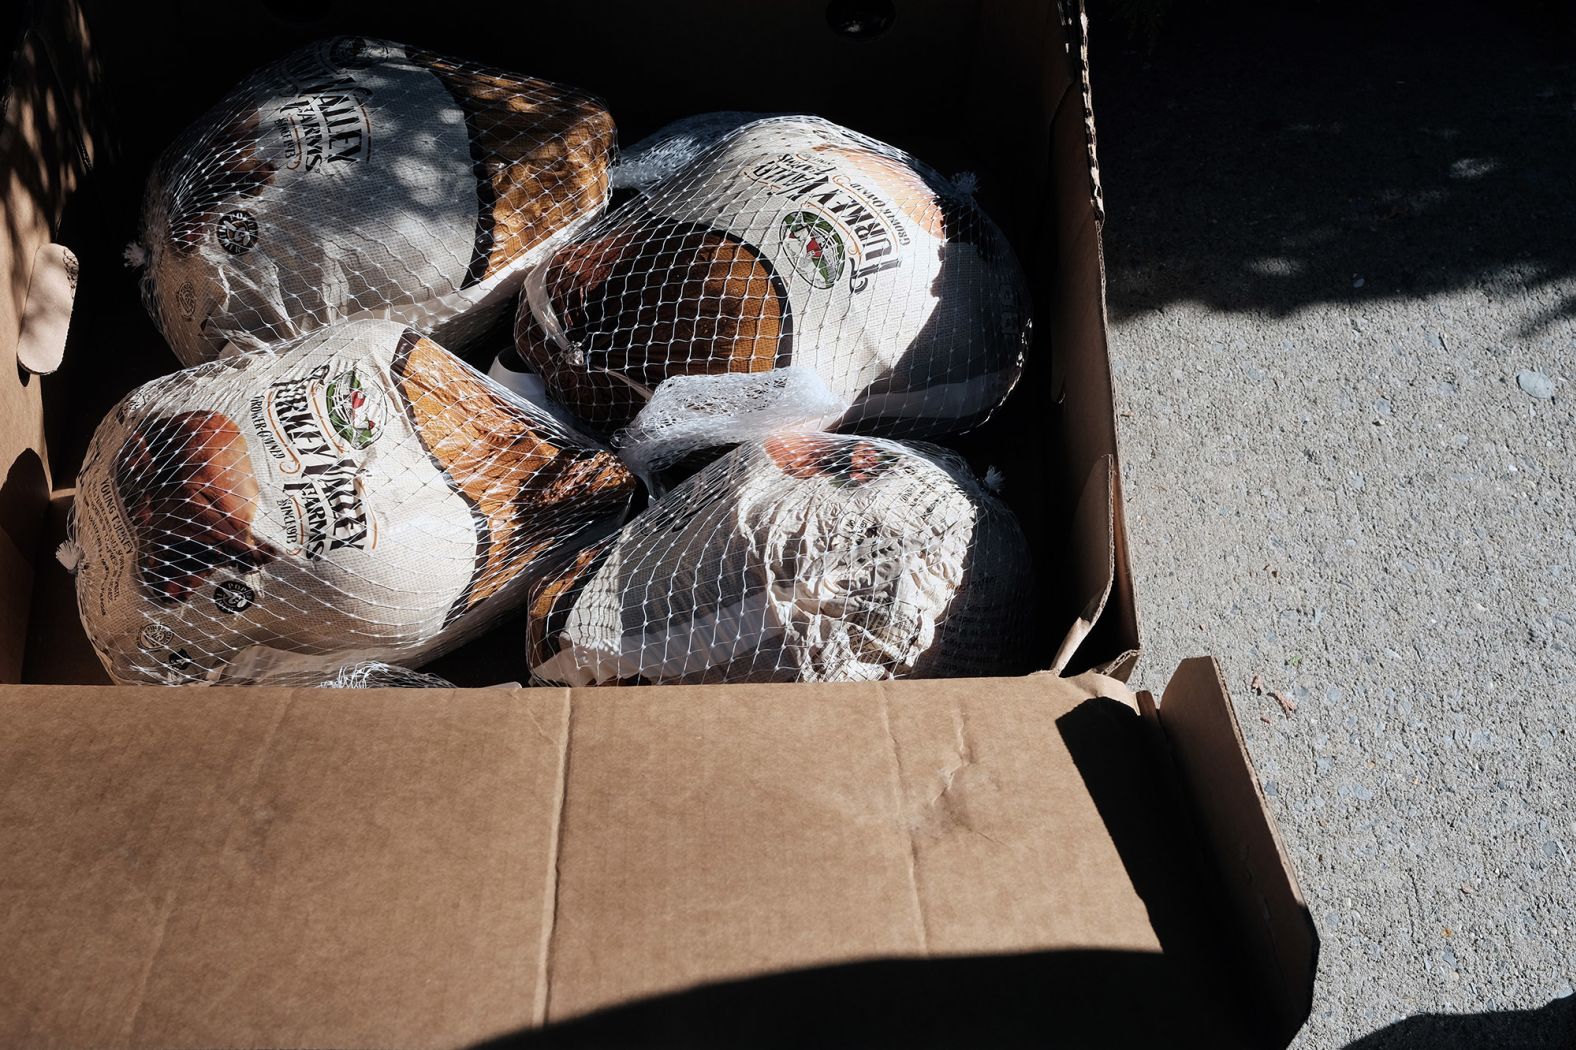 Free Thanksgiving turkeys are distributed Monday at the Holy Innocents Roman Catholic Church in Brooklyn, New York.